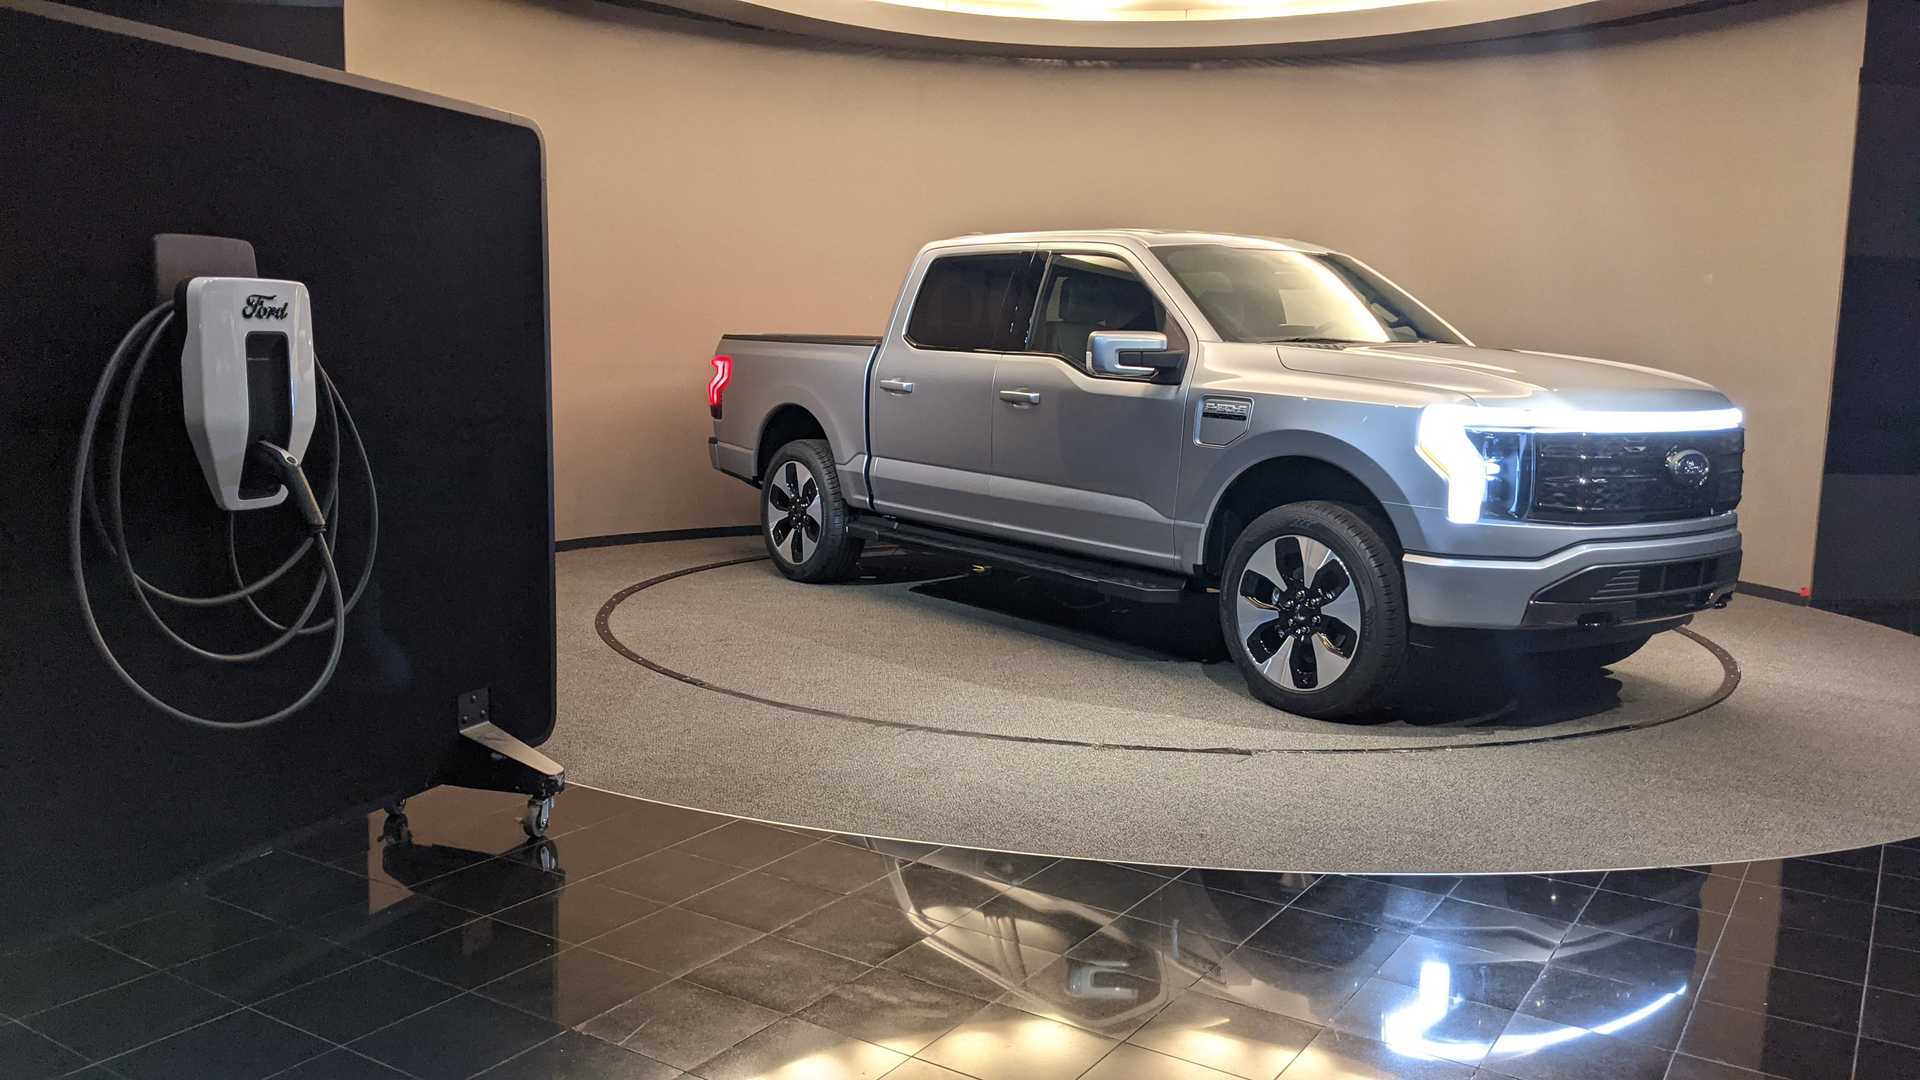 How Much Does It Cost To Install A Ford Lightning Charging Station?